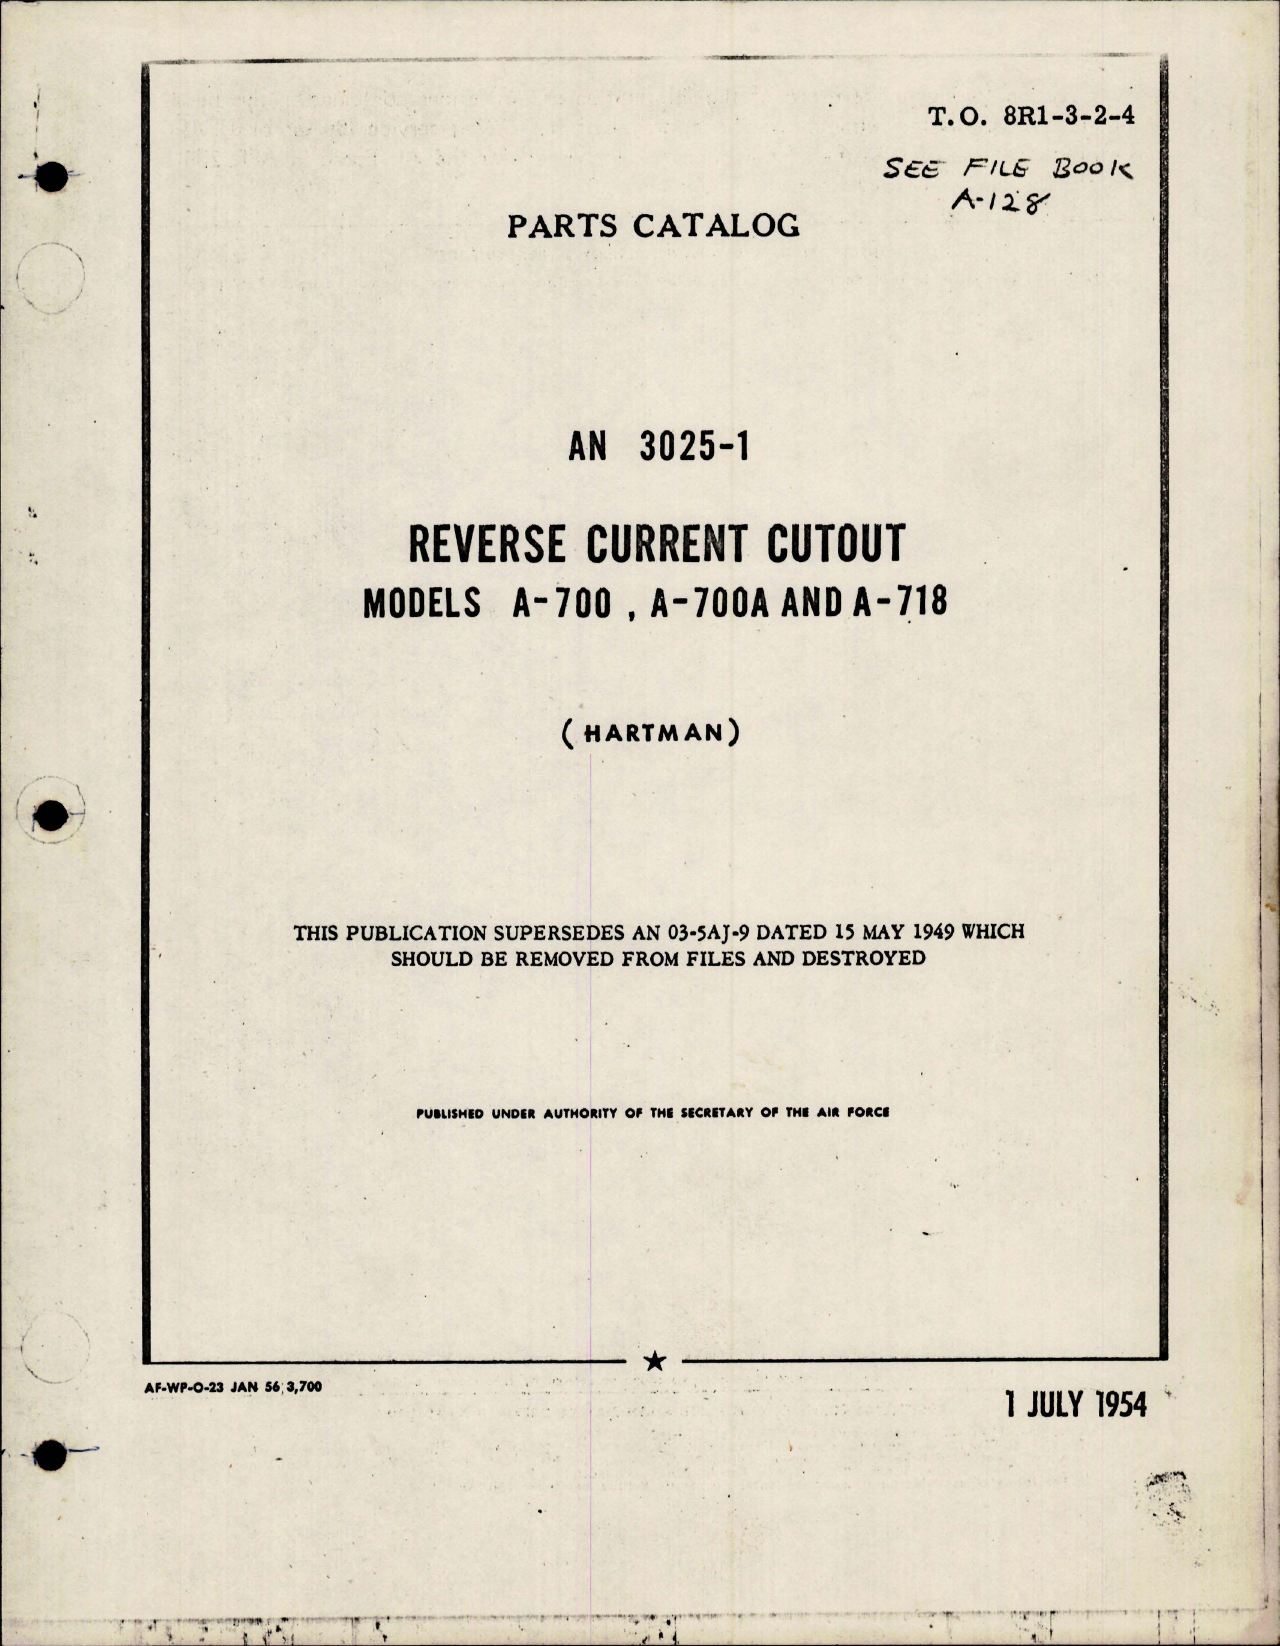 Sample page 1 from AirCorps Library document: Parts Catalog for Reverse Current Cutout - Type AN 3025-1 